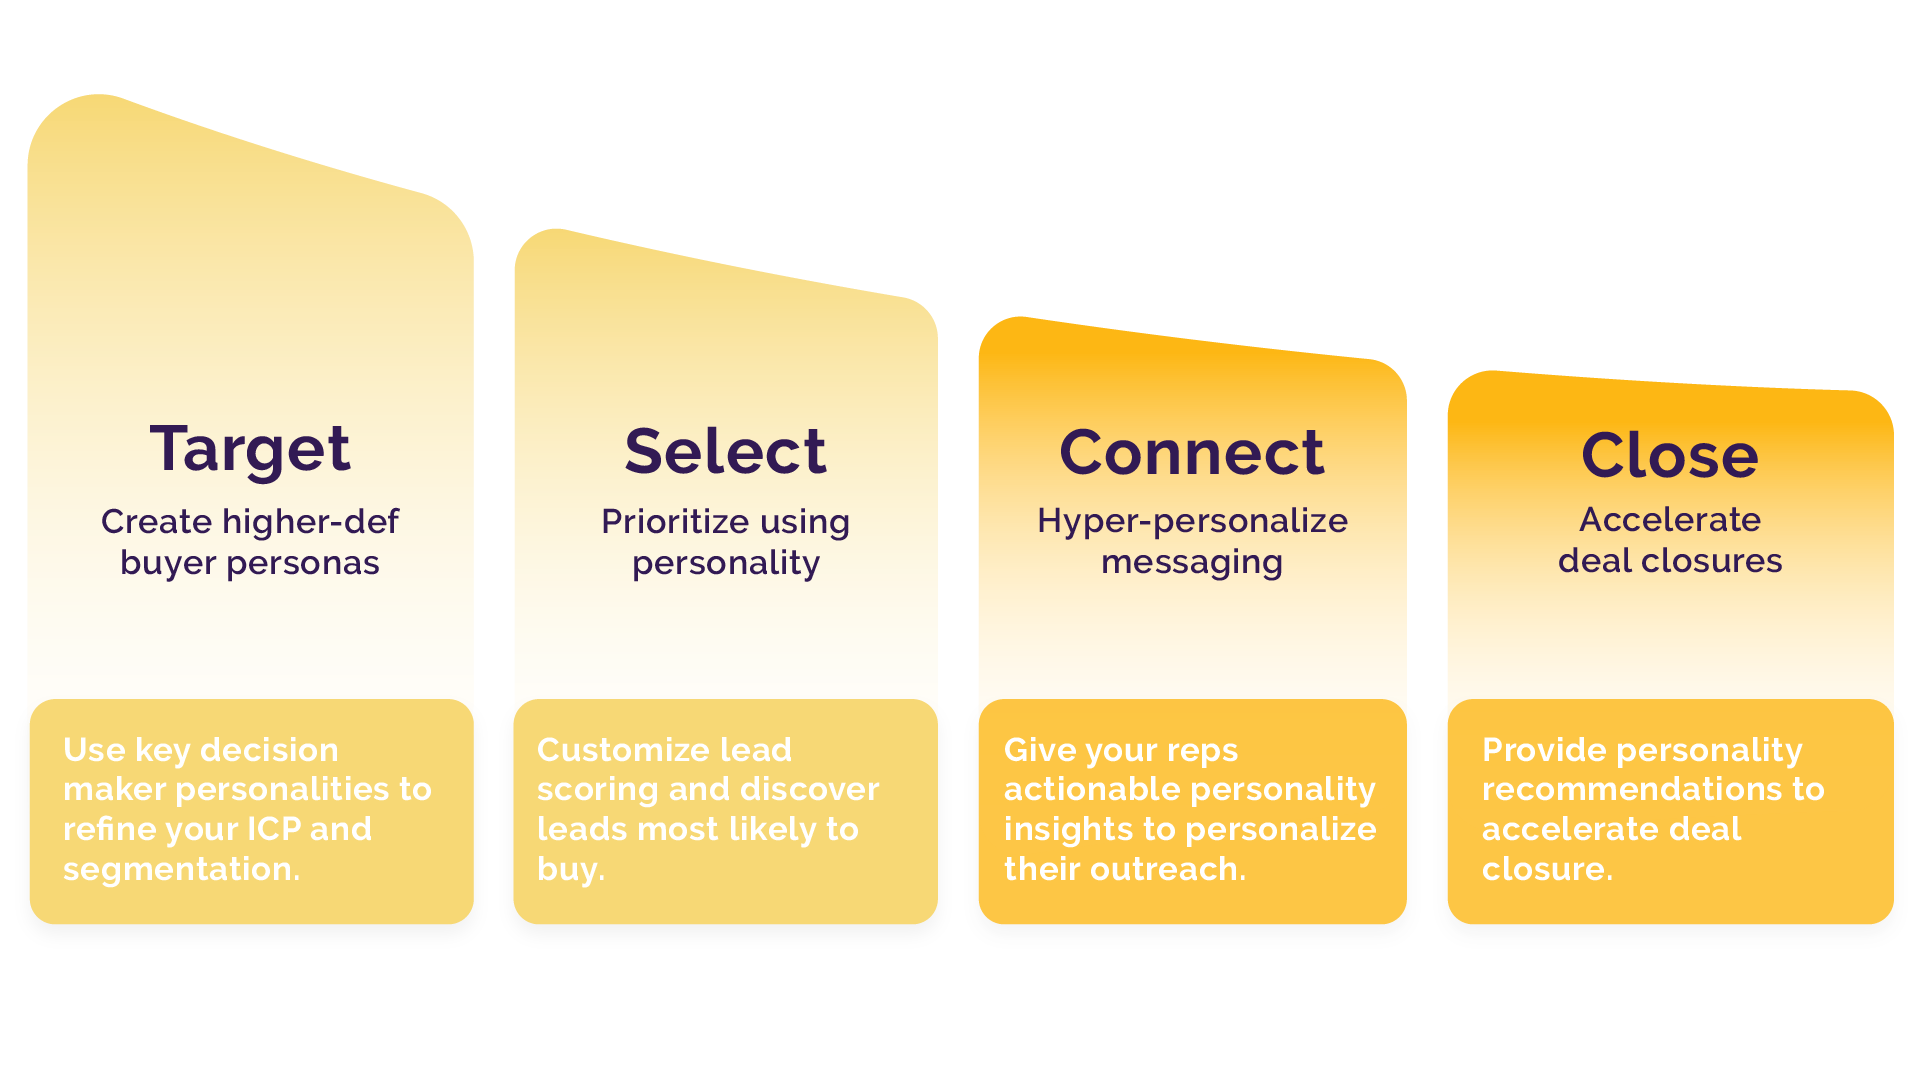 Humantic AI adds rich personality data across all the stages of selling - starting from learning about your ICP, selecting the right prospects, prospecting, following up and finally closing the deal.